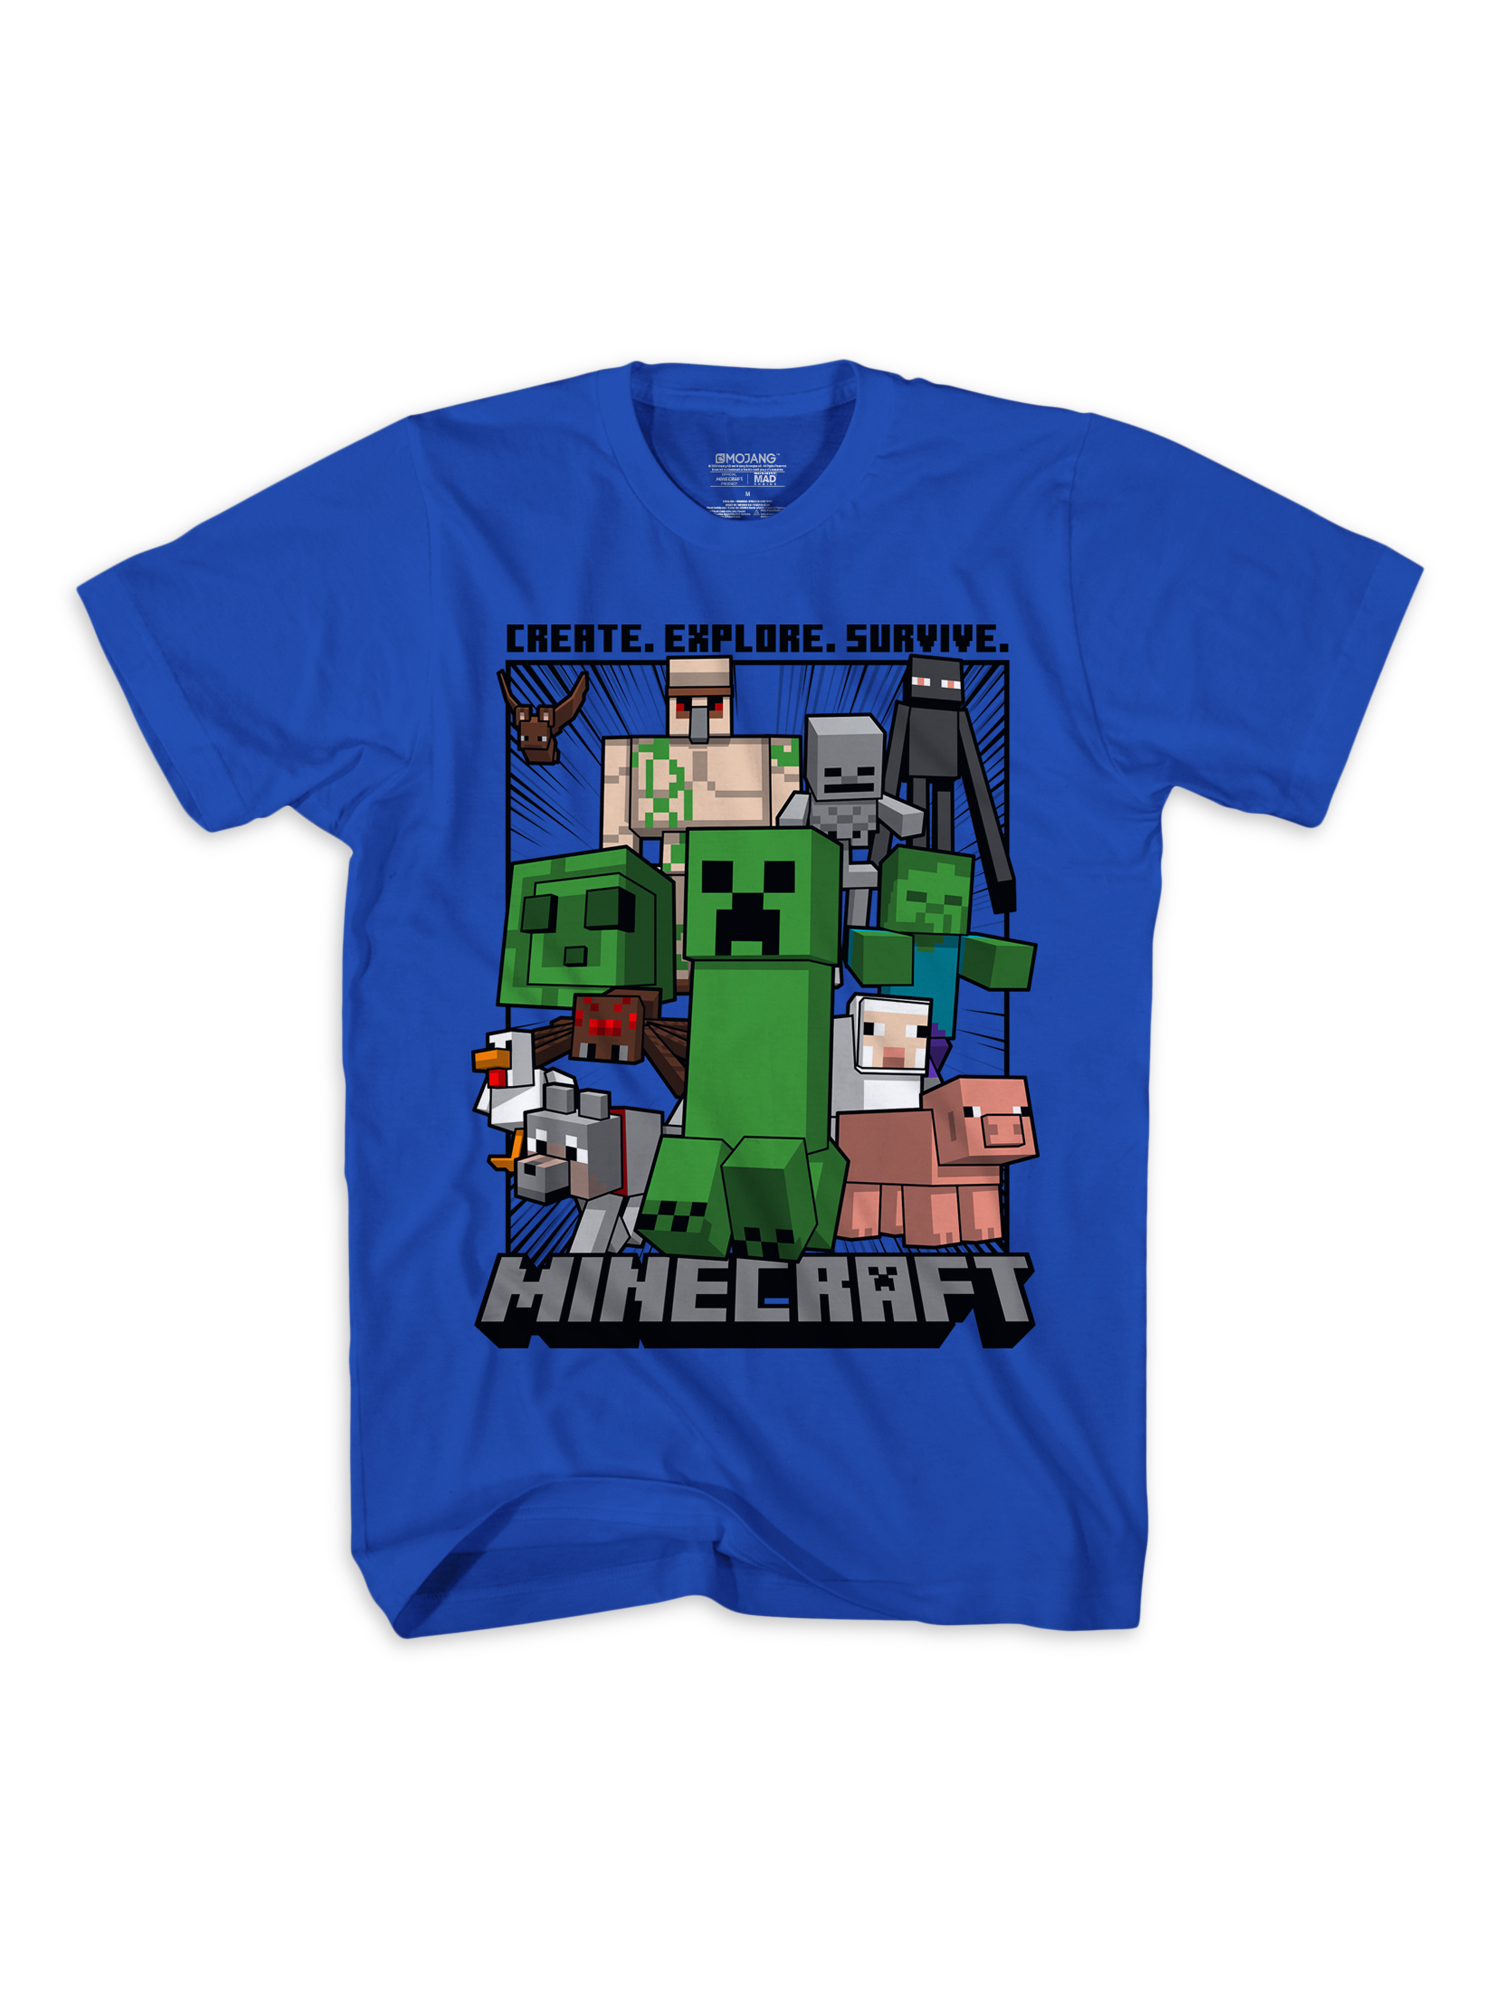 Minecraft Short Sleeve Graphic Crew Neck Relaxed Fit T-Shirt (Little Boys or Big Boys) 2 Pack - image 3 of 4